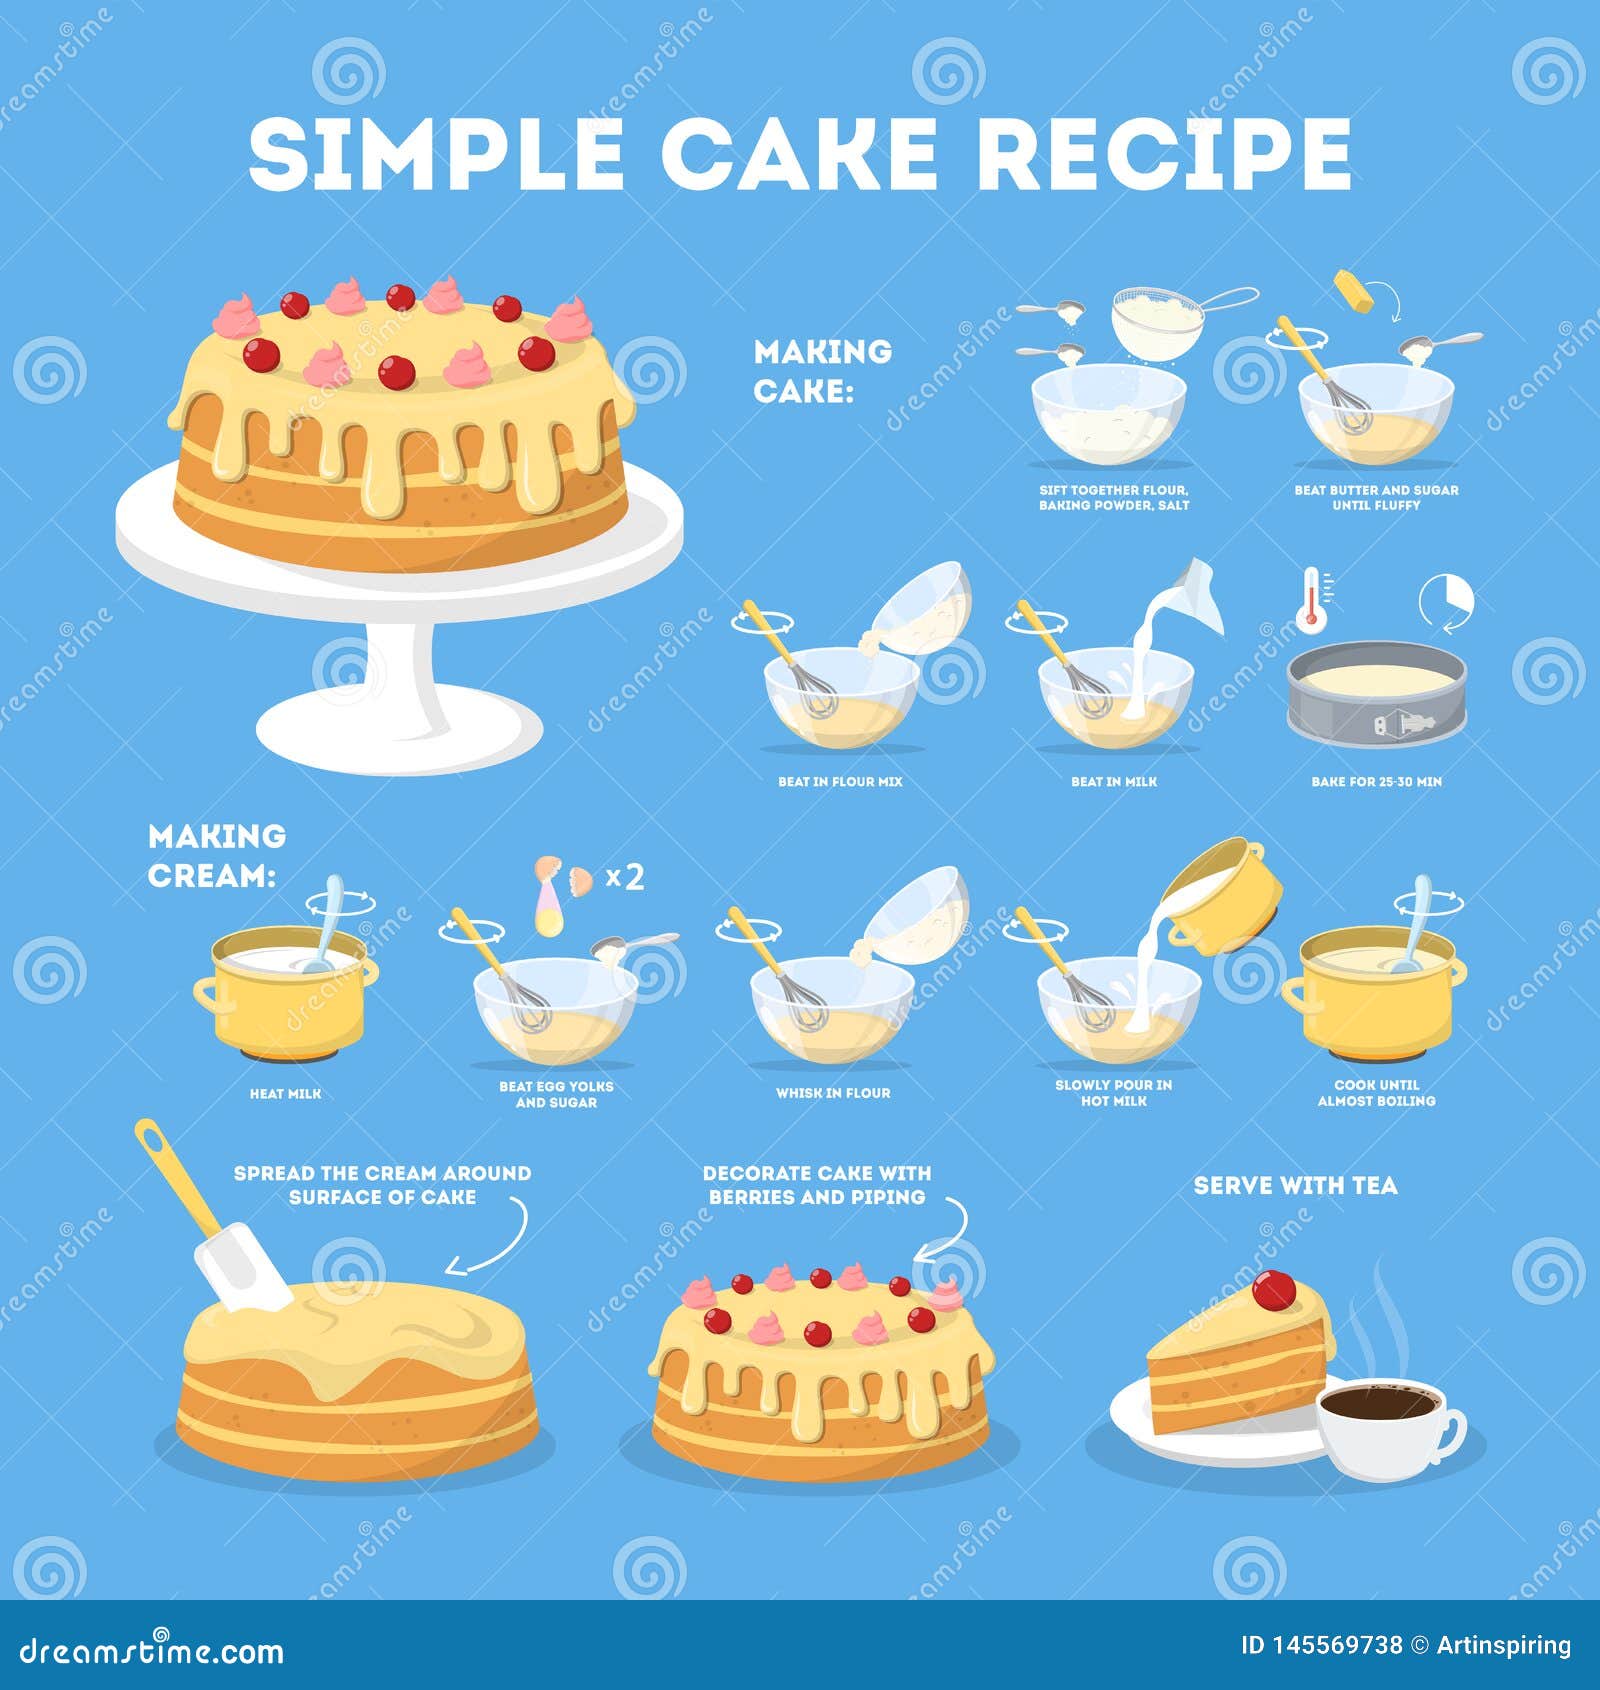 Easy Cake with Cream Recipe for Cooking at Home Stock Vector ...